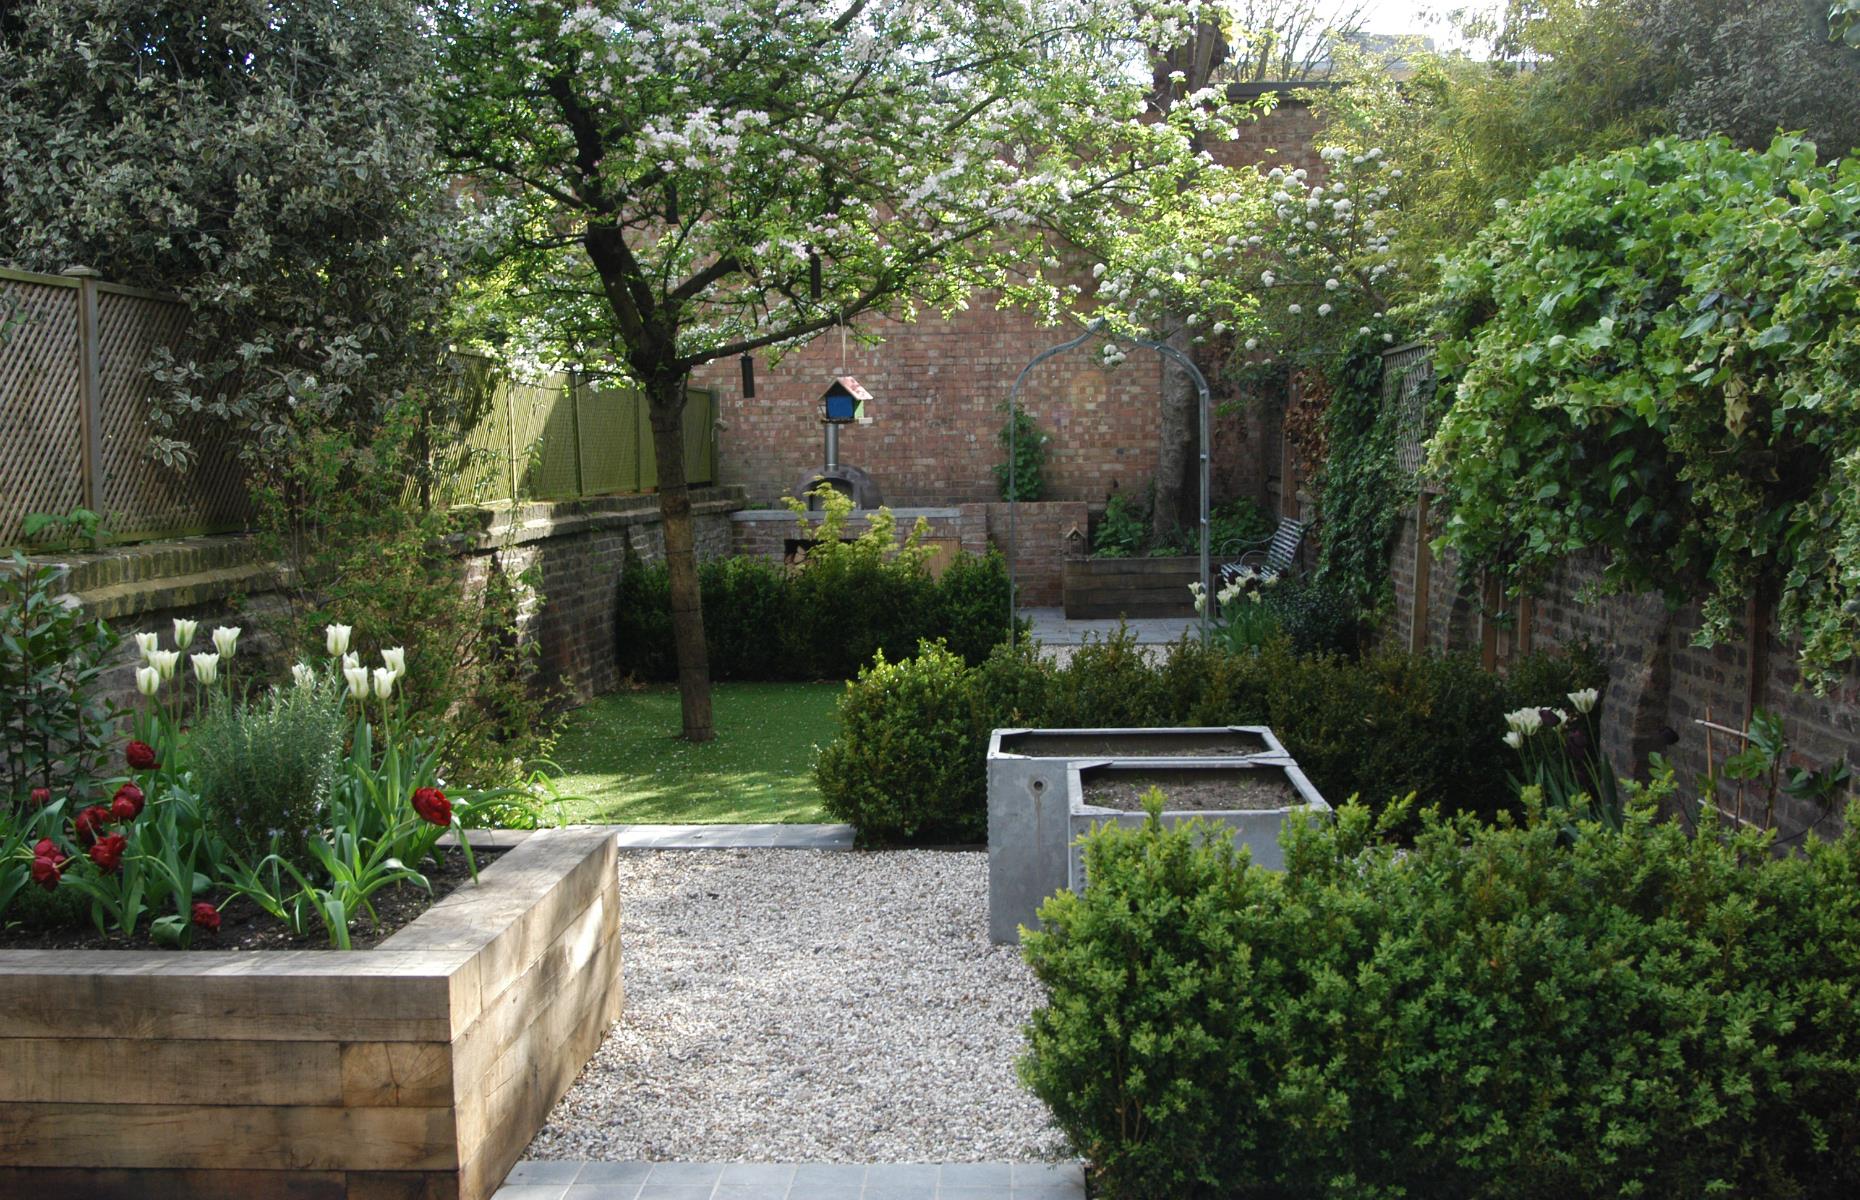 <p>If you are looking to redesign your garden and don’t foresee moving house again, do so with the longer term in mind. Incorporate slopes rather than steps, cut back on lawned areas, add easy-to-navigate pathways, spaces for seating and prioritise the area closest to the house, like this outside space by <a href="http://www.gardenbreeze.co.uk/" rel="nofollow">Breeze Garden Design</a>. Go for raised beds over conventional borders and favour evergreen planting schemes for long-lasting, low-maintenance annual greenery.</p>